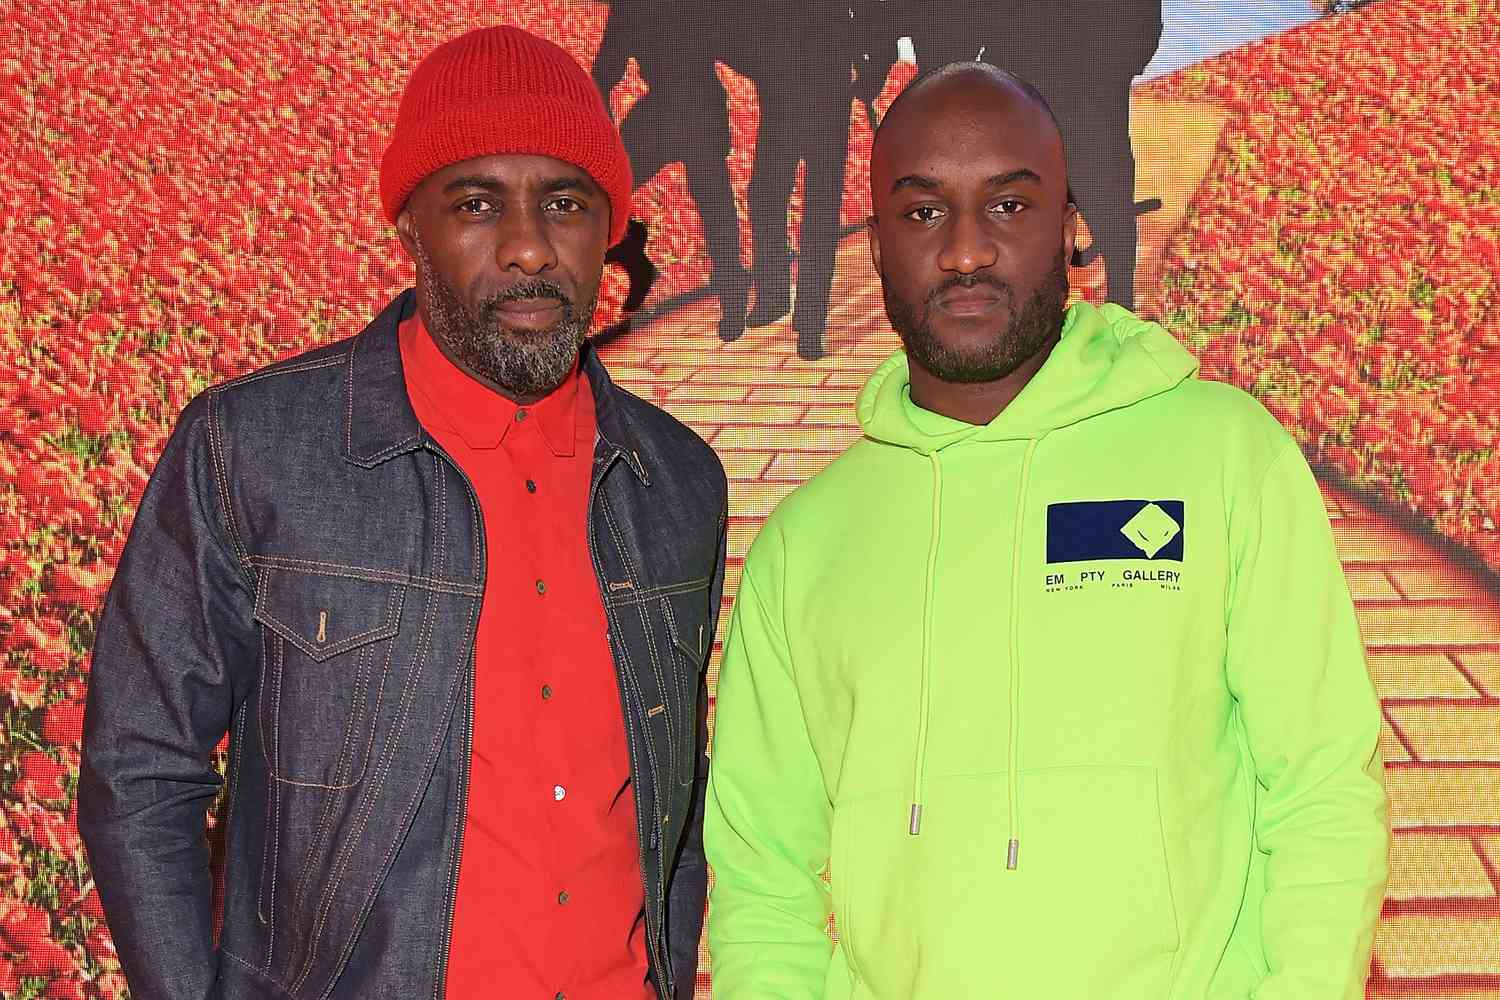 Idris Elba (L) and Virgil Abloh attend the Louis Vuitton and Virgil Abloh London Pop-Up on October 19, 2018 in London, United Kingdom.